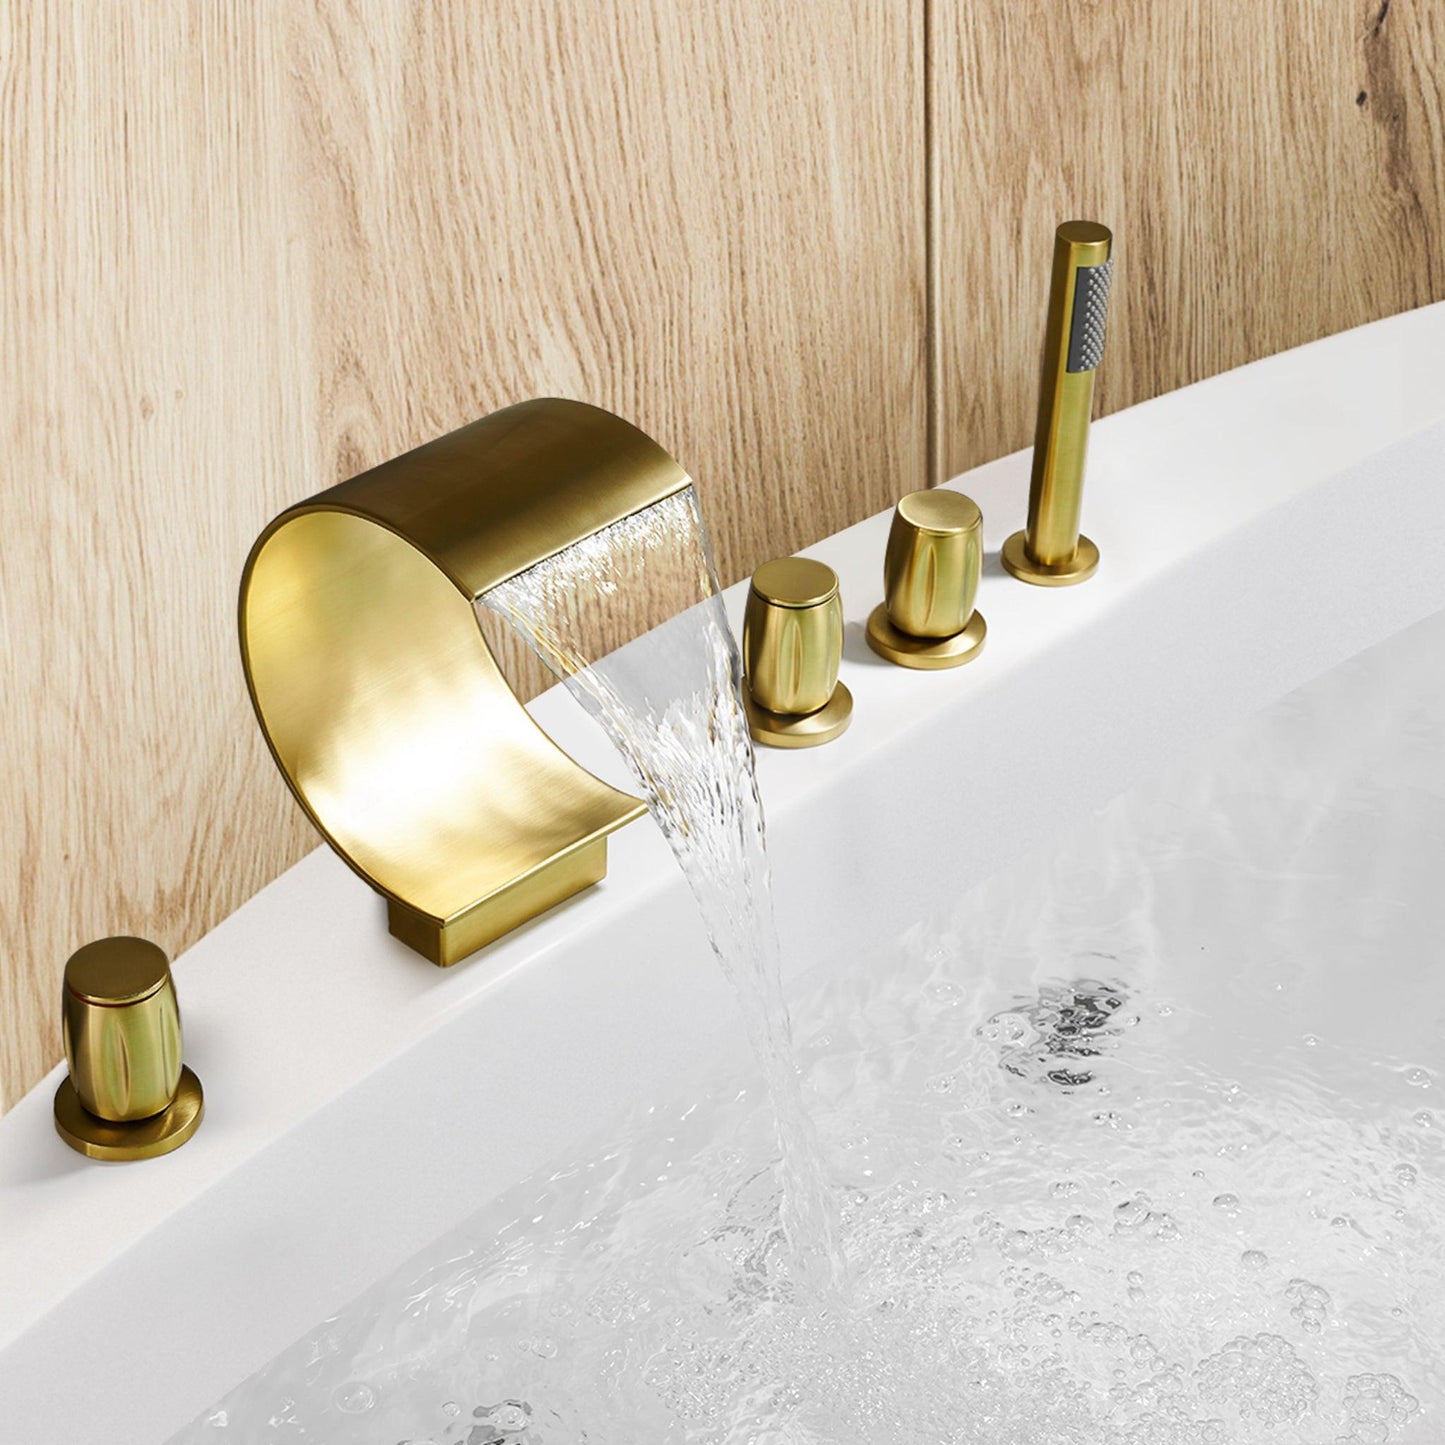 Altair Recea Brushed Gold Triple Handle Deck-mounted Bathtub Faucet With Handshower and Diverter